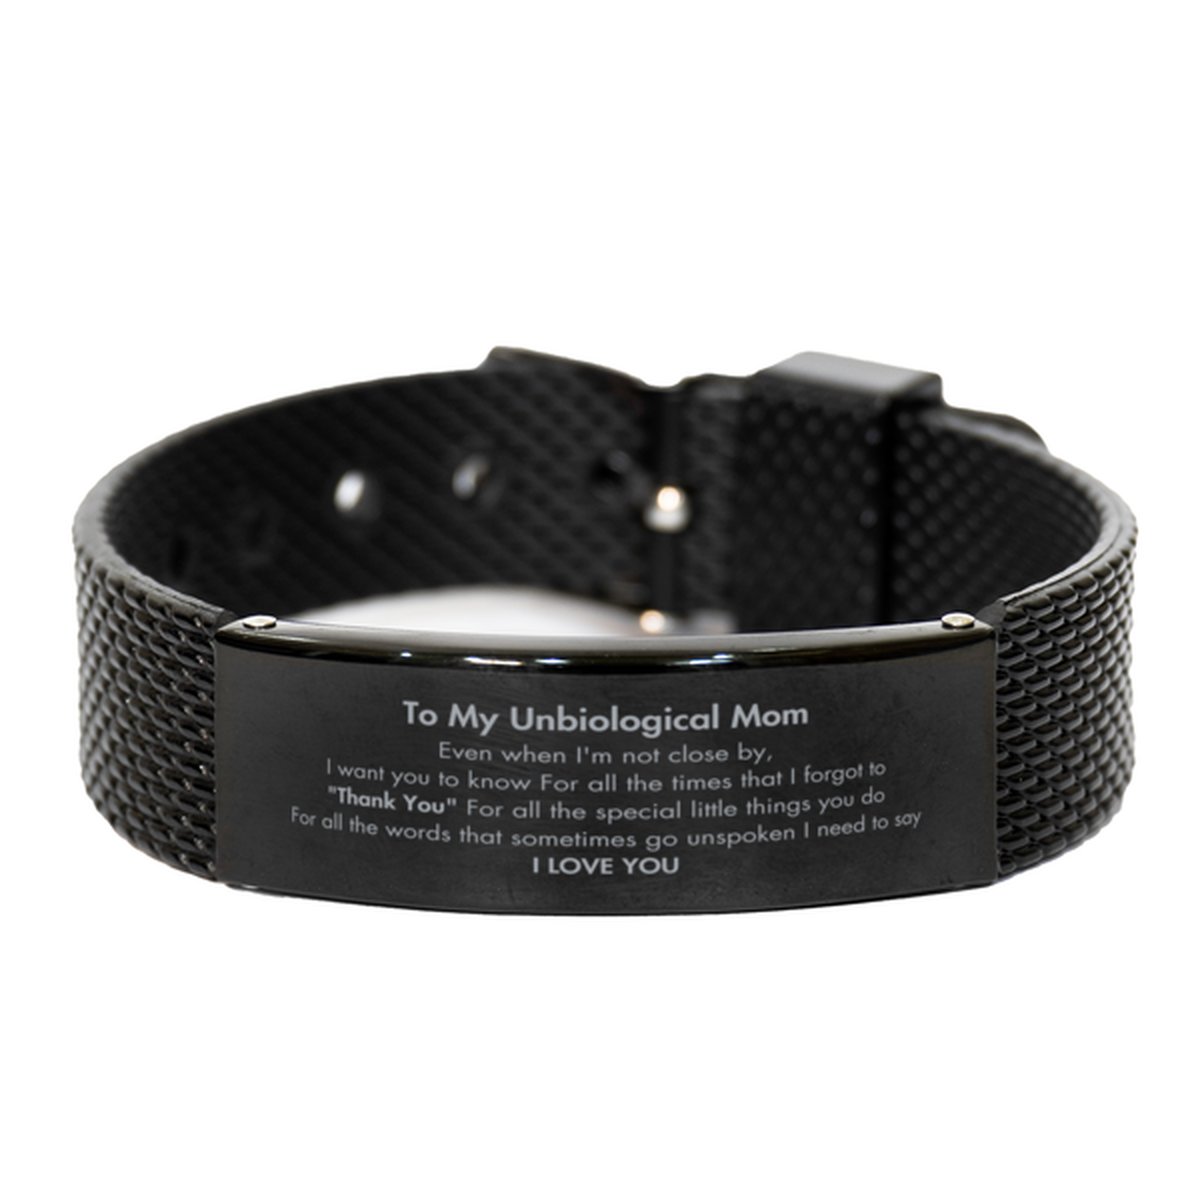 Thank You Gifts for Unbiological Mom, Keepsake Black Shark Mesh Bracelet Gifts for Unbiological Mom Birthday Mother's day Father's Day Unbiological Mom For all the words That sometimes go unspoken I need to say I LOVE YOU